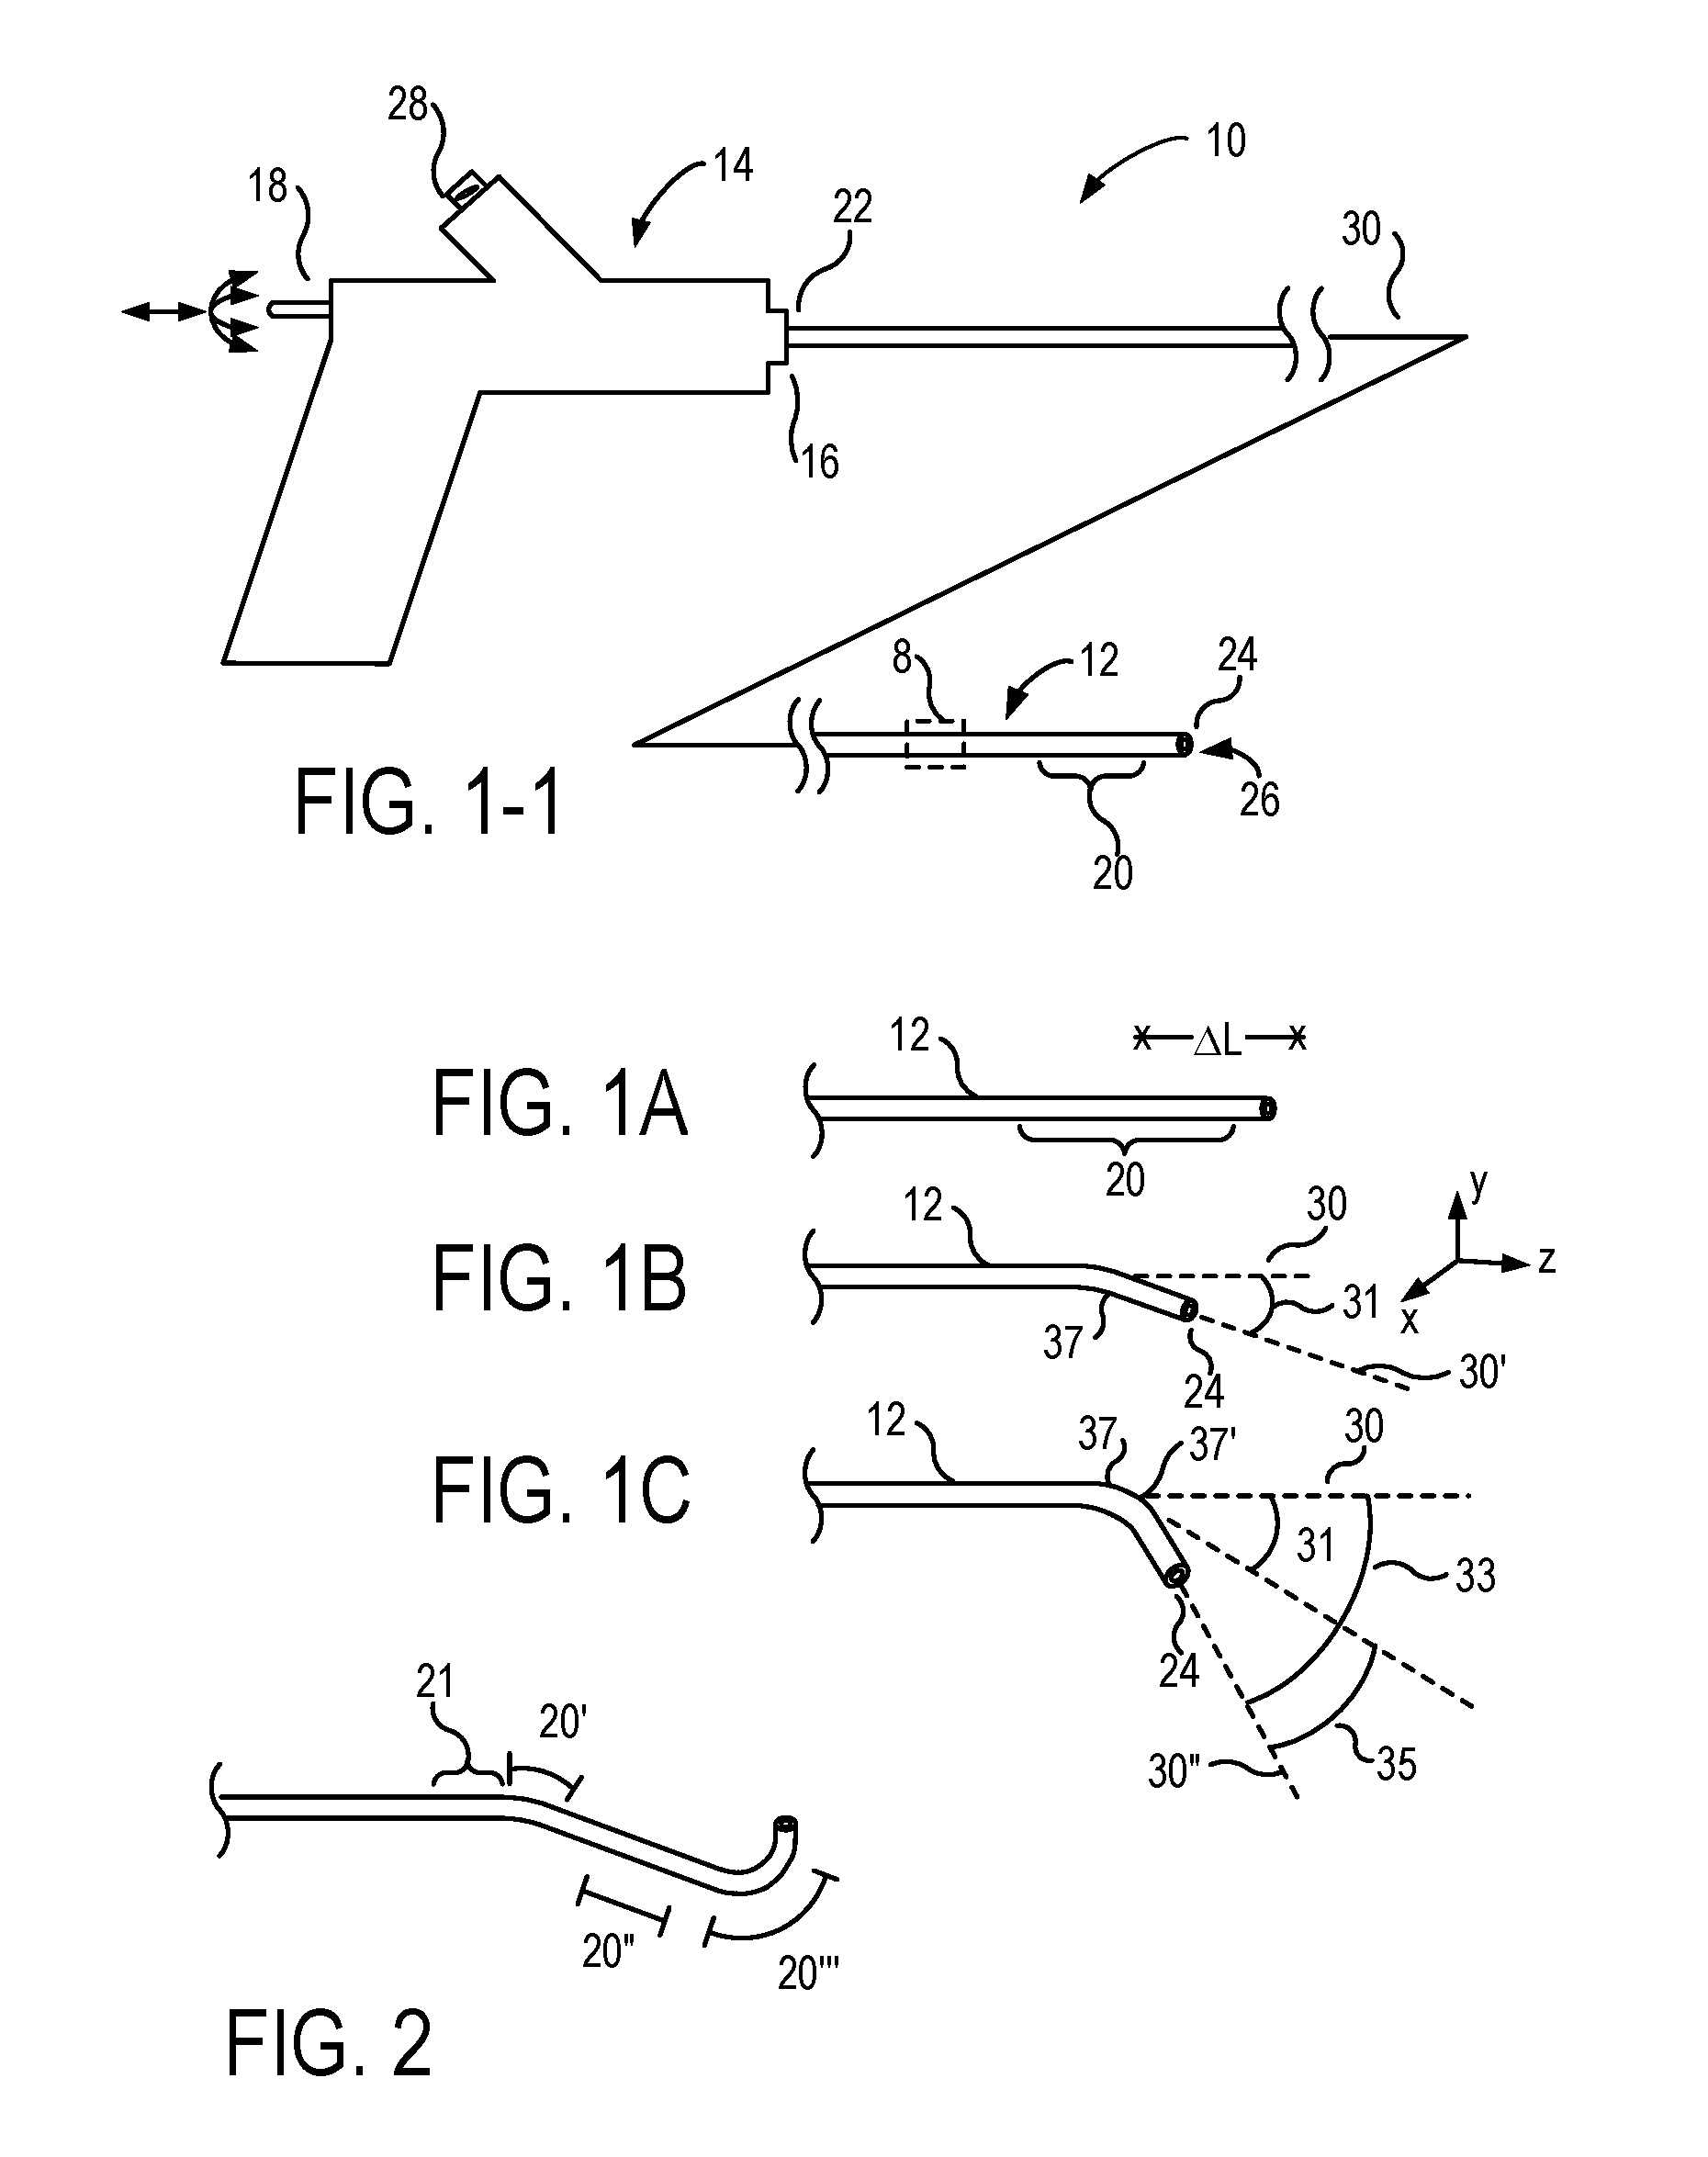 Fluid-Expandable Body Articulation of Catheters and Other Flexible Structures